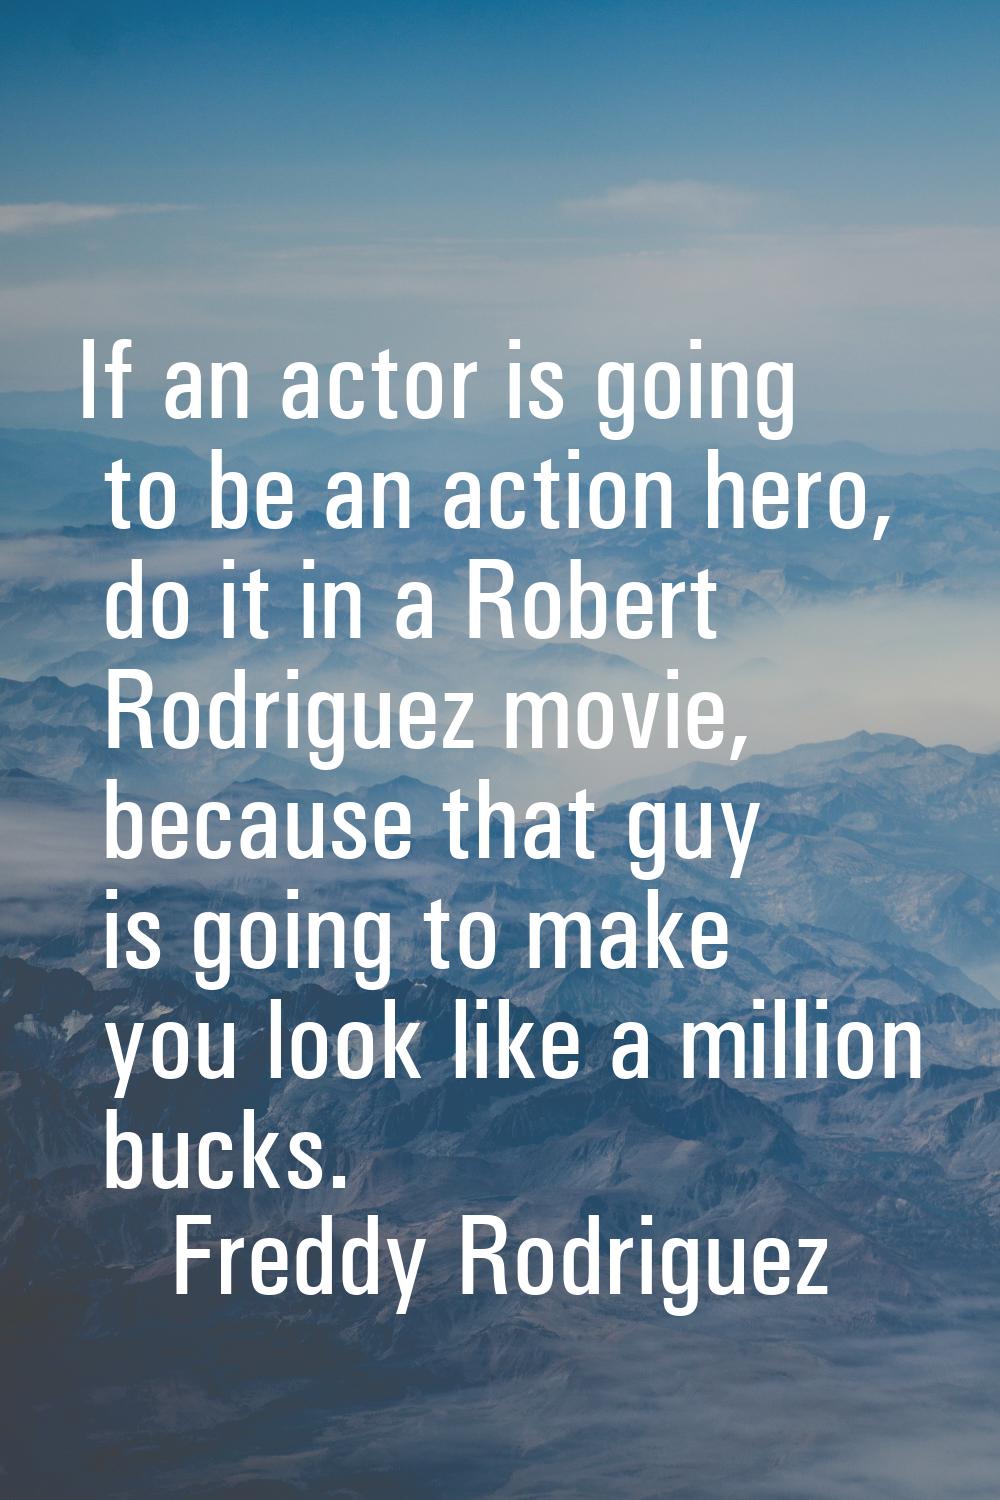 If an actor is going to be an action hero, do it in a Robert Rodriguez movie, because that guy is g